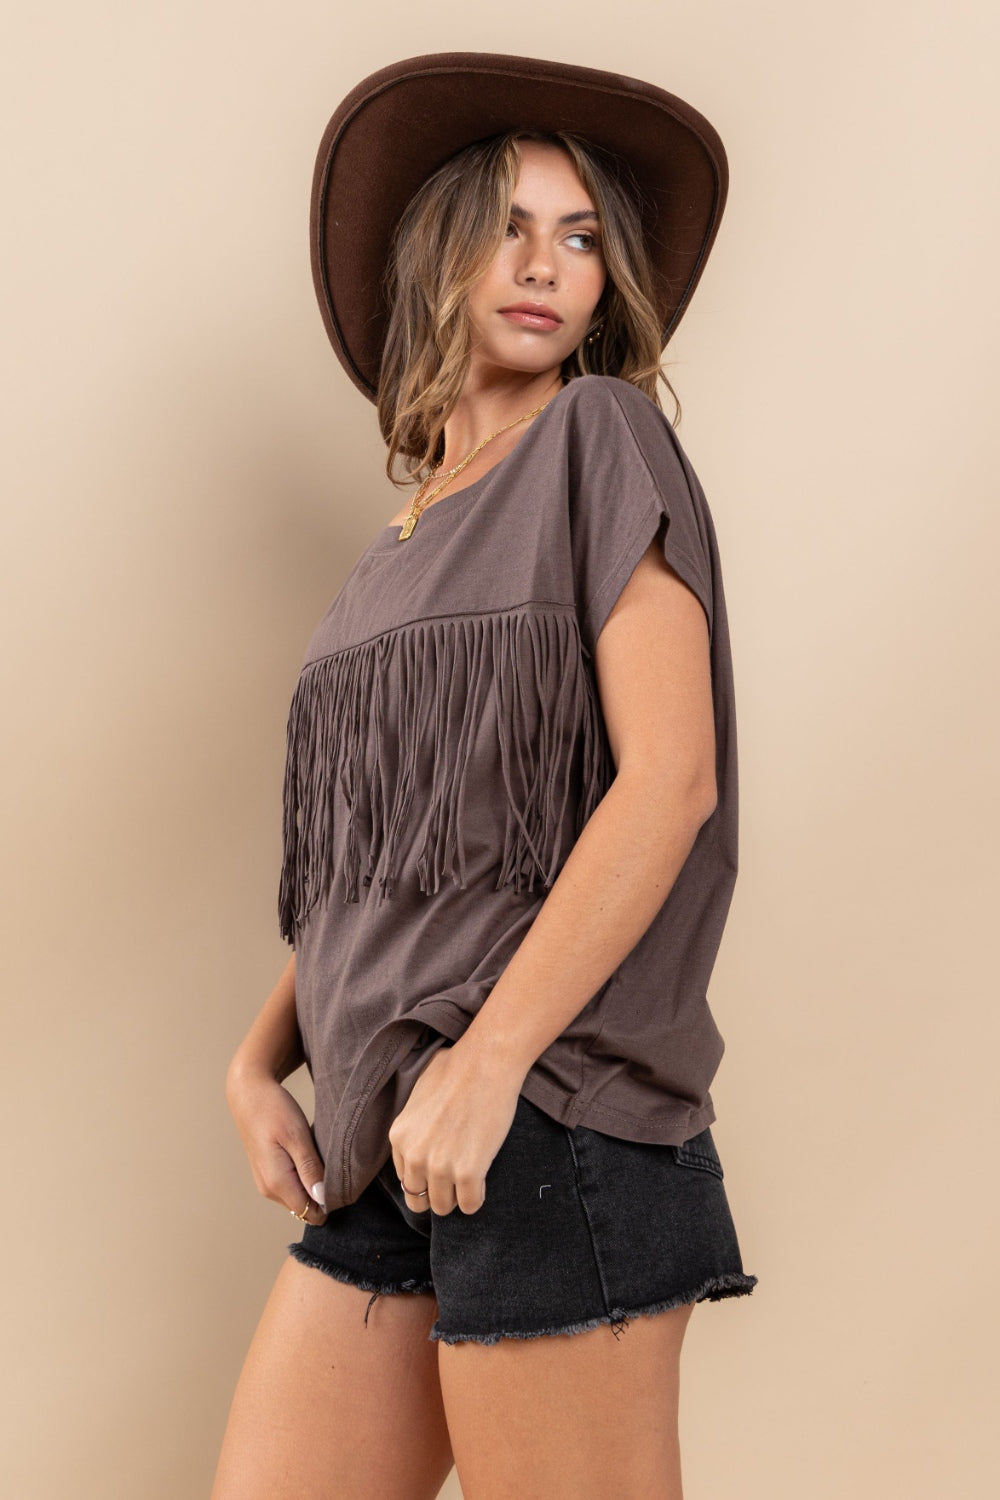 The Fringe Detail Round Neck Short Sleeve Top is a trendy and stylish addition to any wardrobe. The fringe detailing adds a fun and playful touch to this classic silhouette S - L